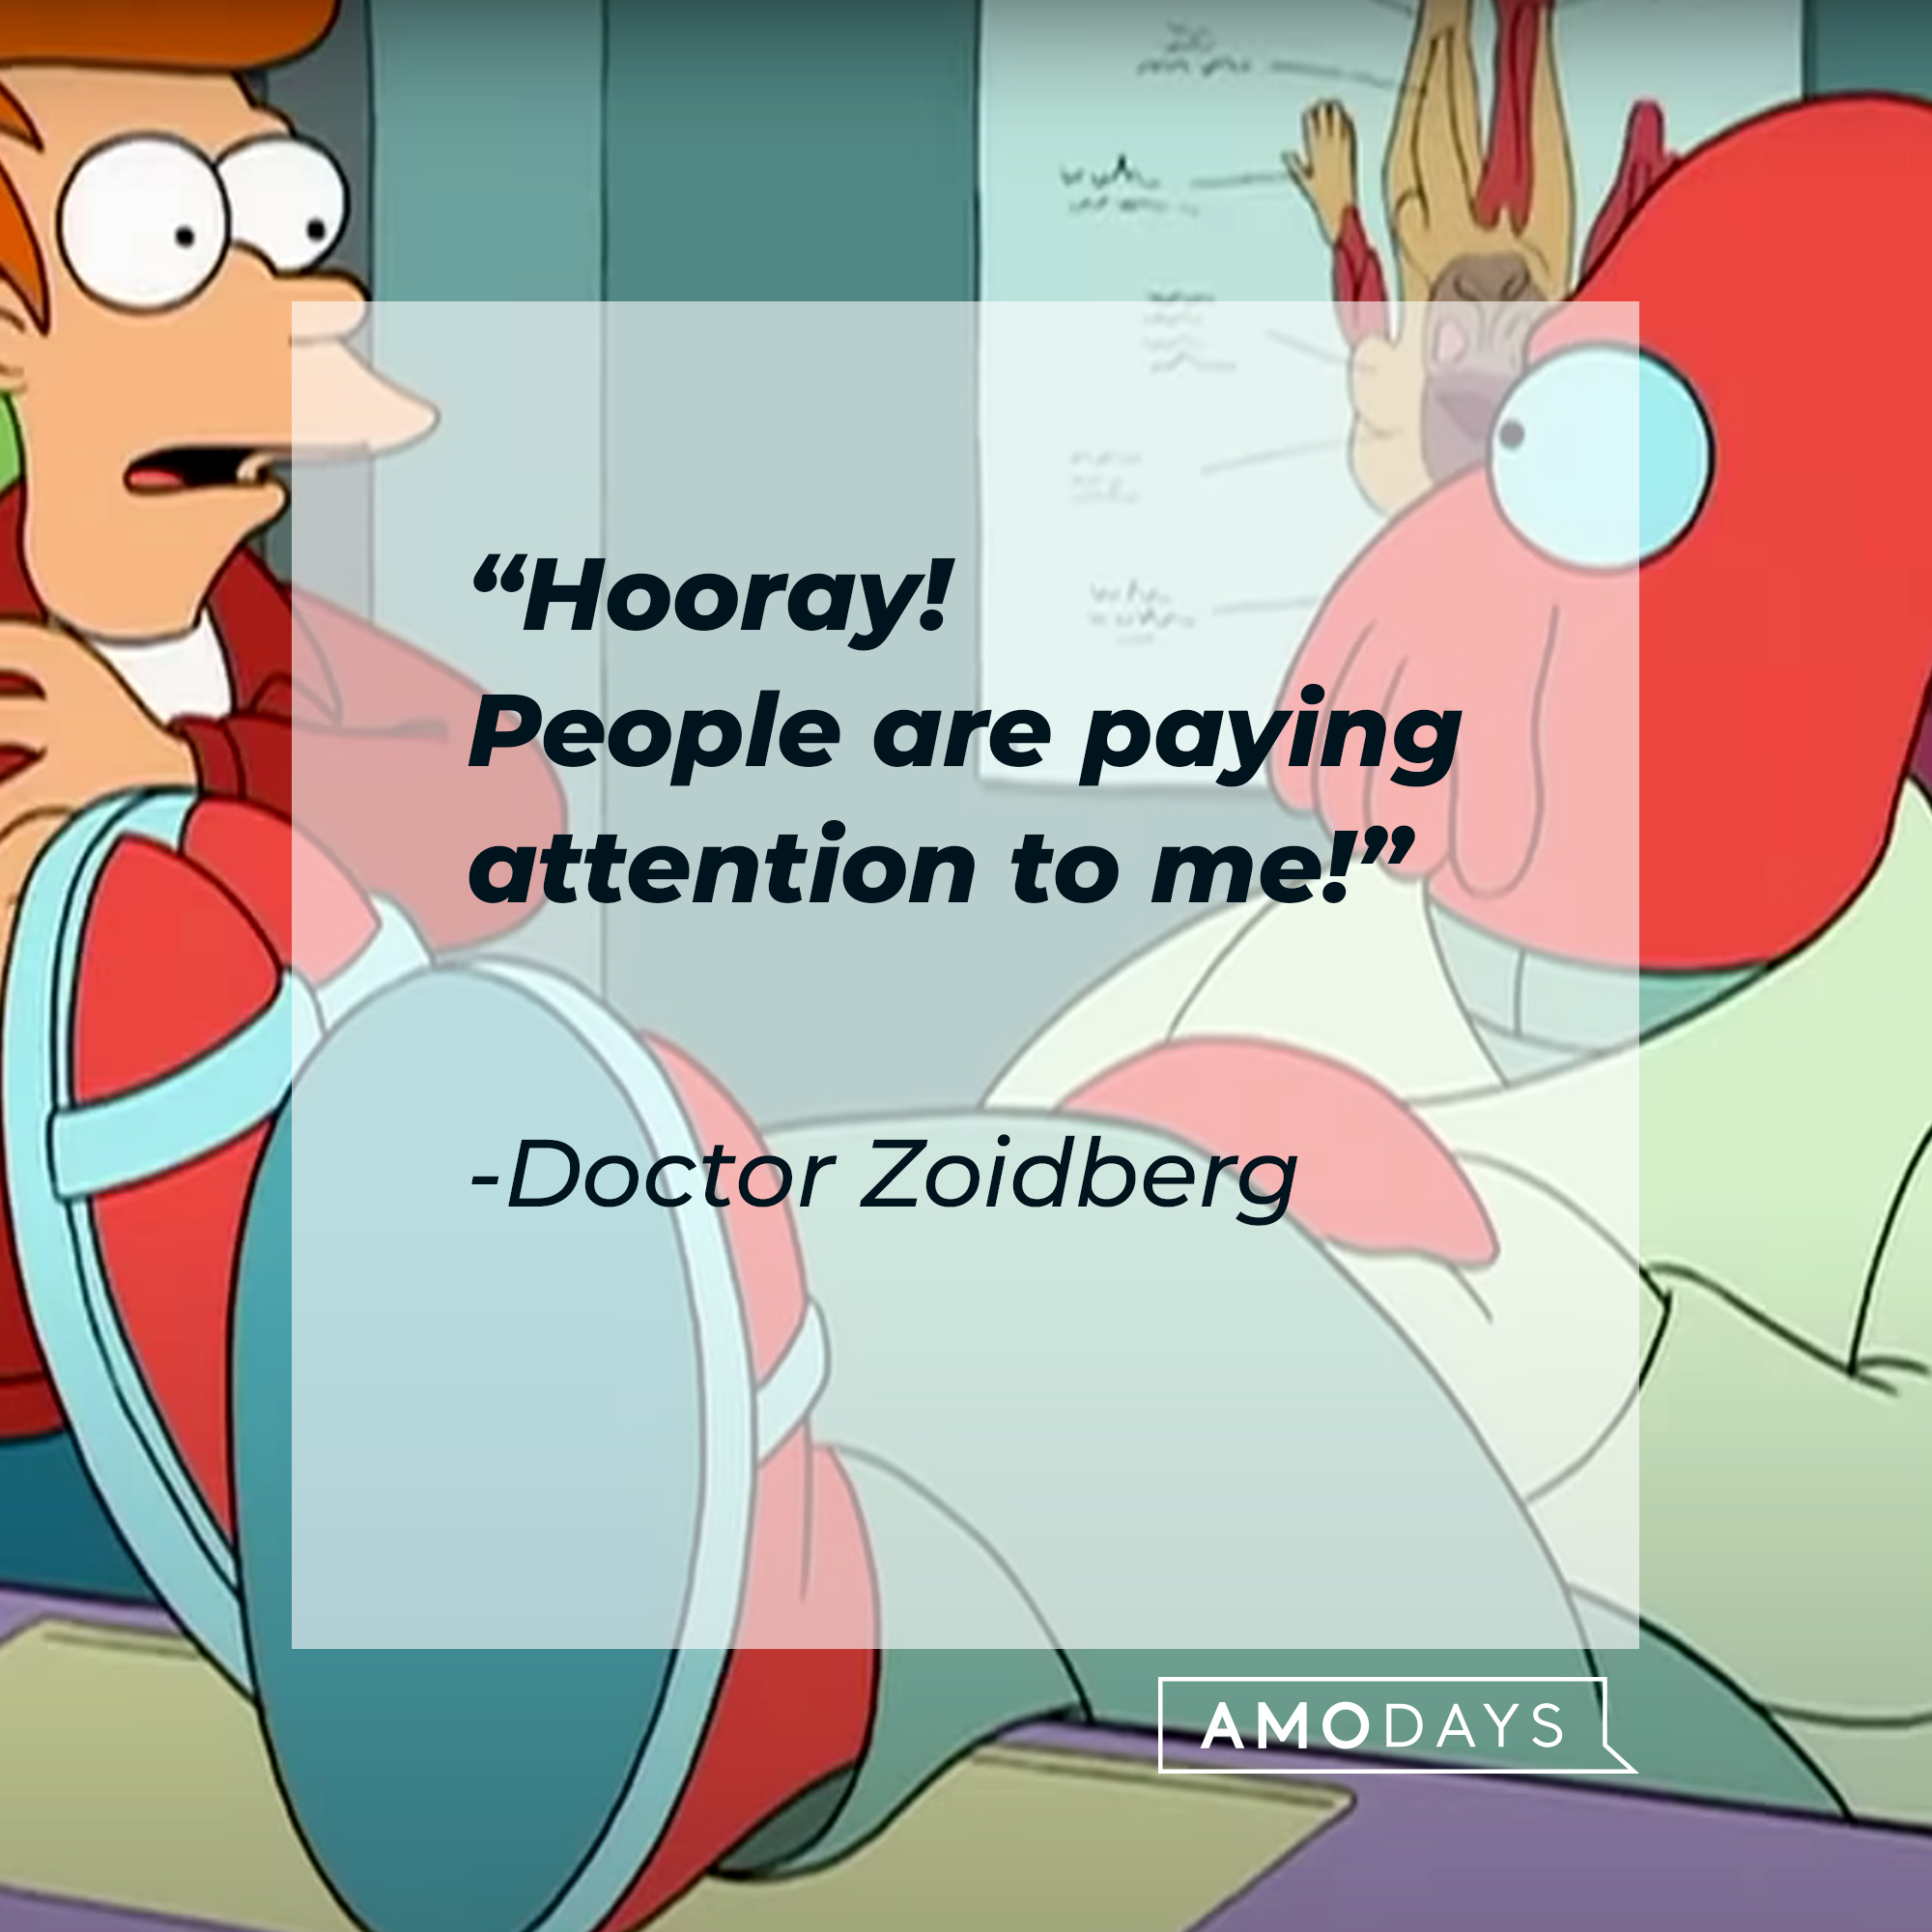 Doctor Zoidberg, with his quote: "Hooray! People are paying attention to me!" | Source:  facebook.com/Futurama